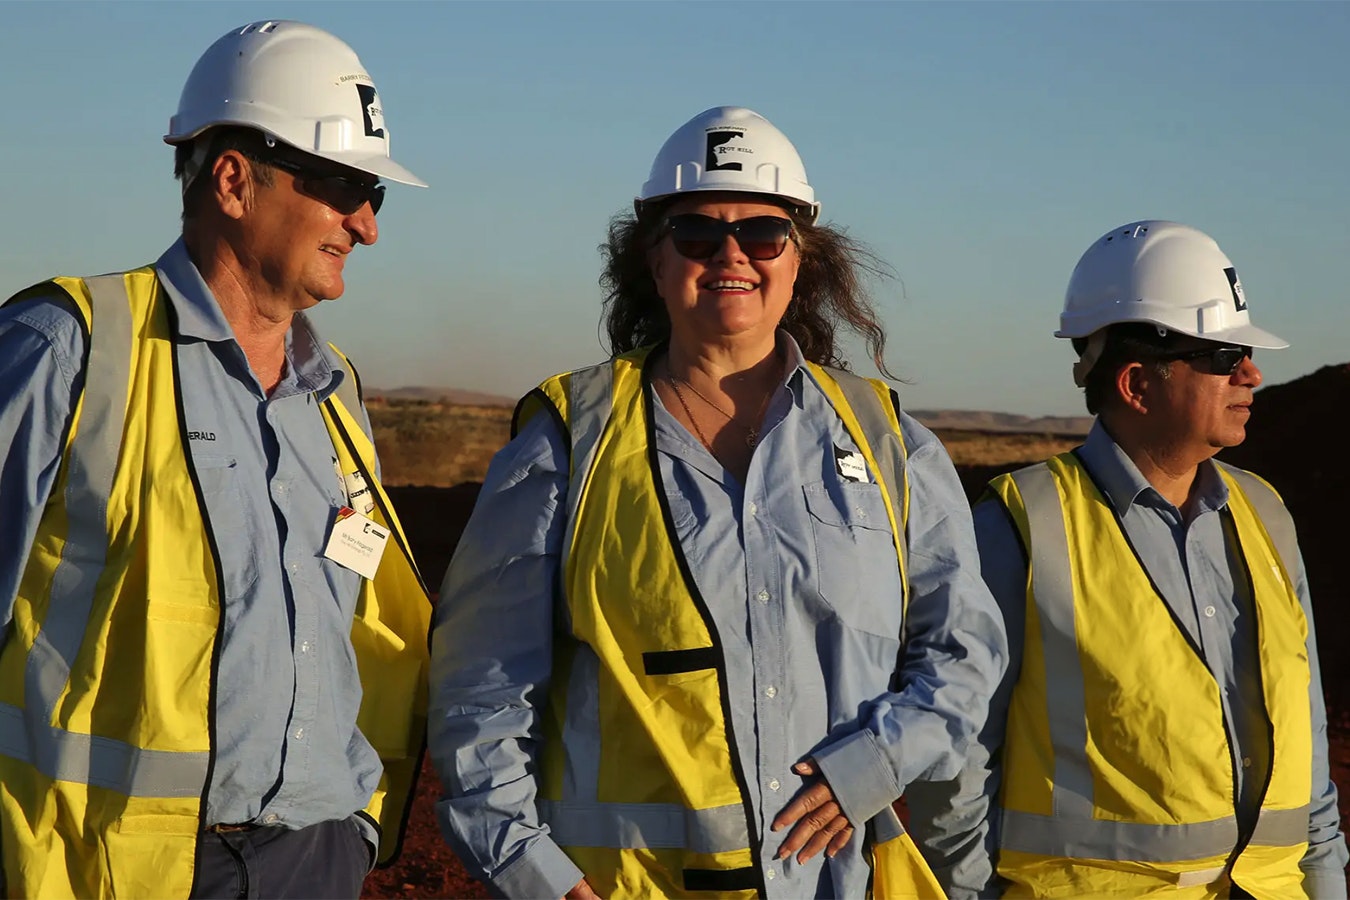 Billionaire Gina Rinehart, center, CEO of Hancock Prospecting Pty Ltd., is buying stakes in the world's largest rare earth operations.